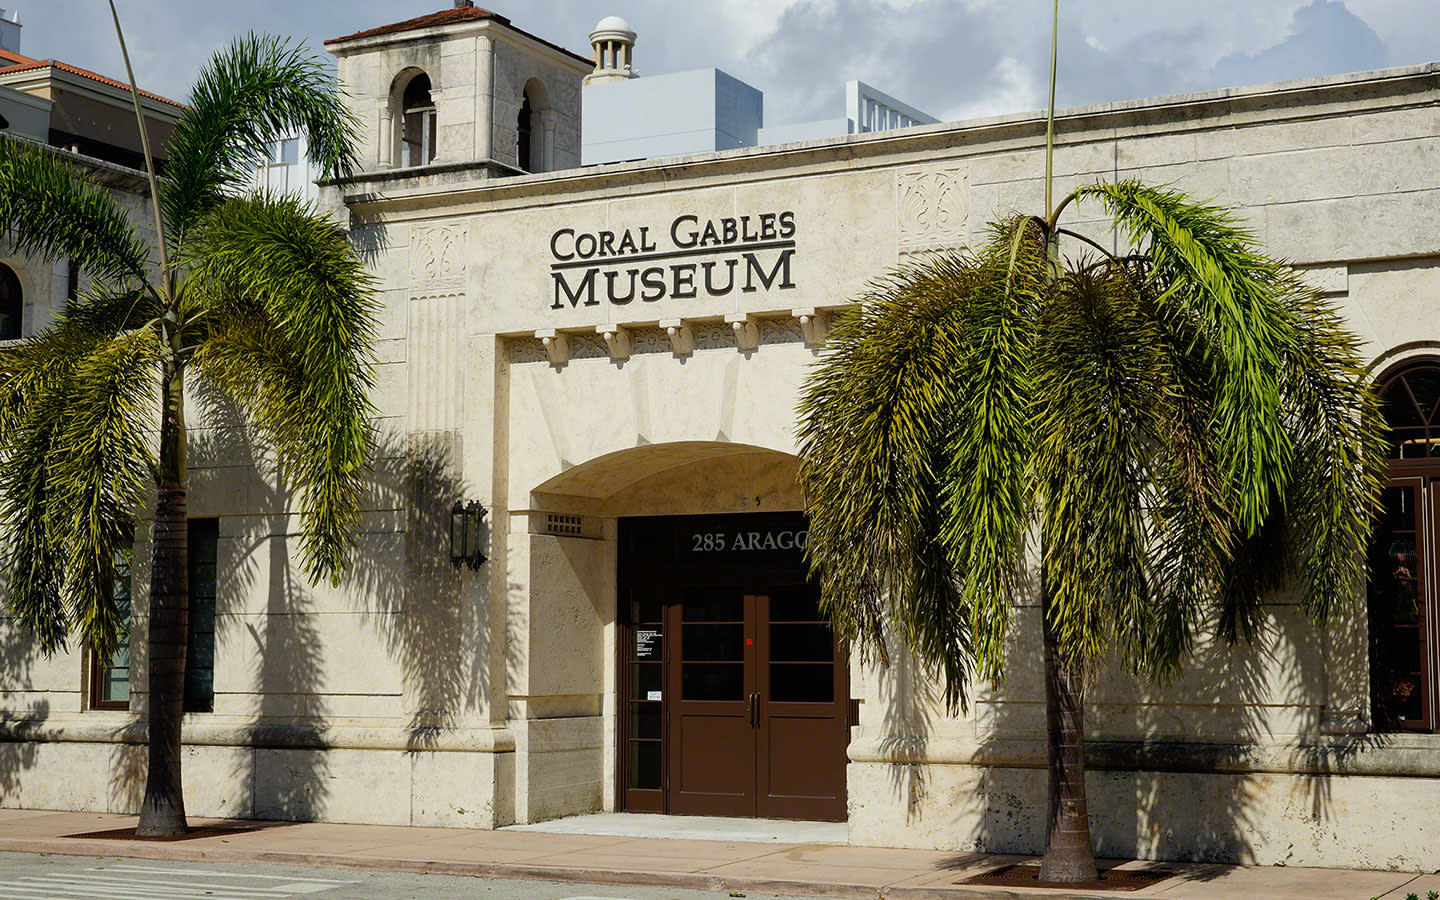 Coral-Gables-Museum-Entrance_by_nd_nc_1440x900_AA271BF4-5056-A36A-0B35248EB3BA0489-aa271afa5056a36_aa271c5a-5056-a36a-0b05716af185cf27.jpg